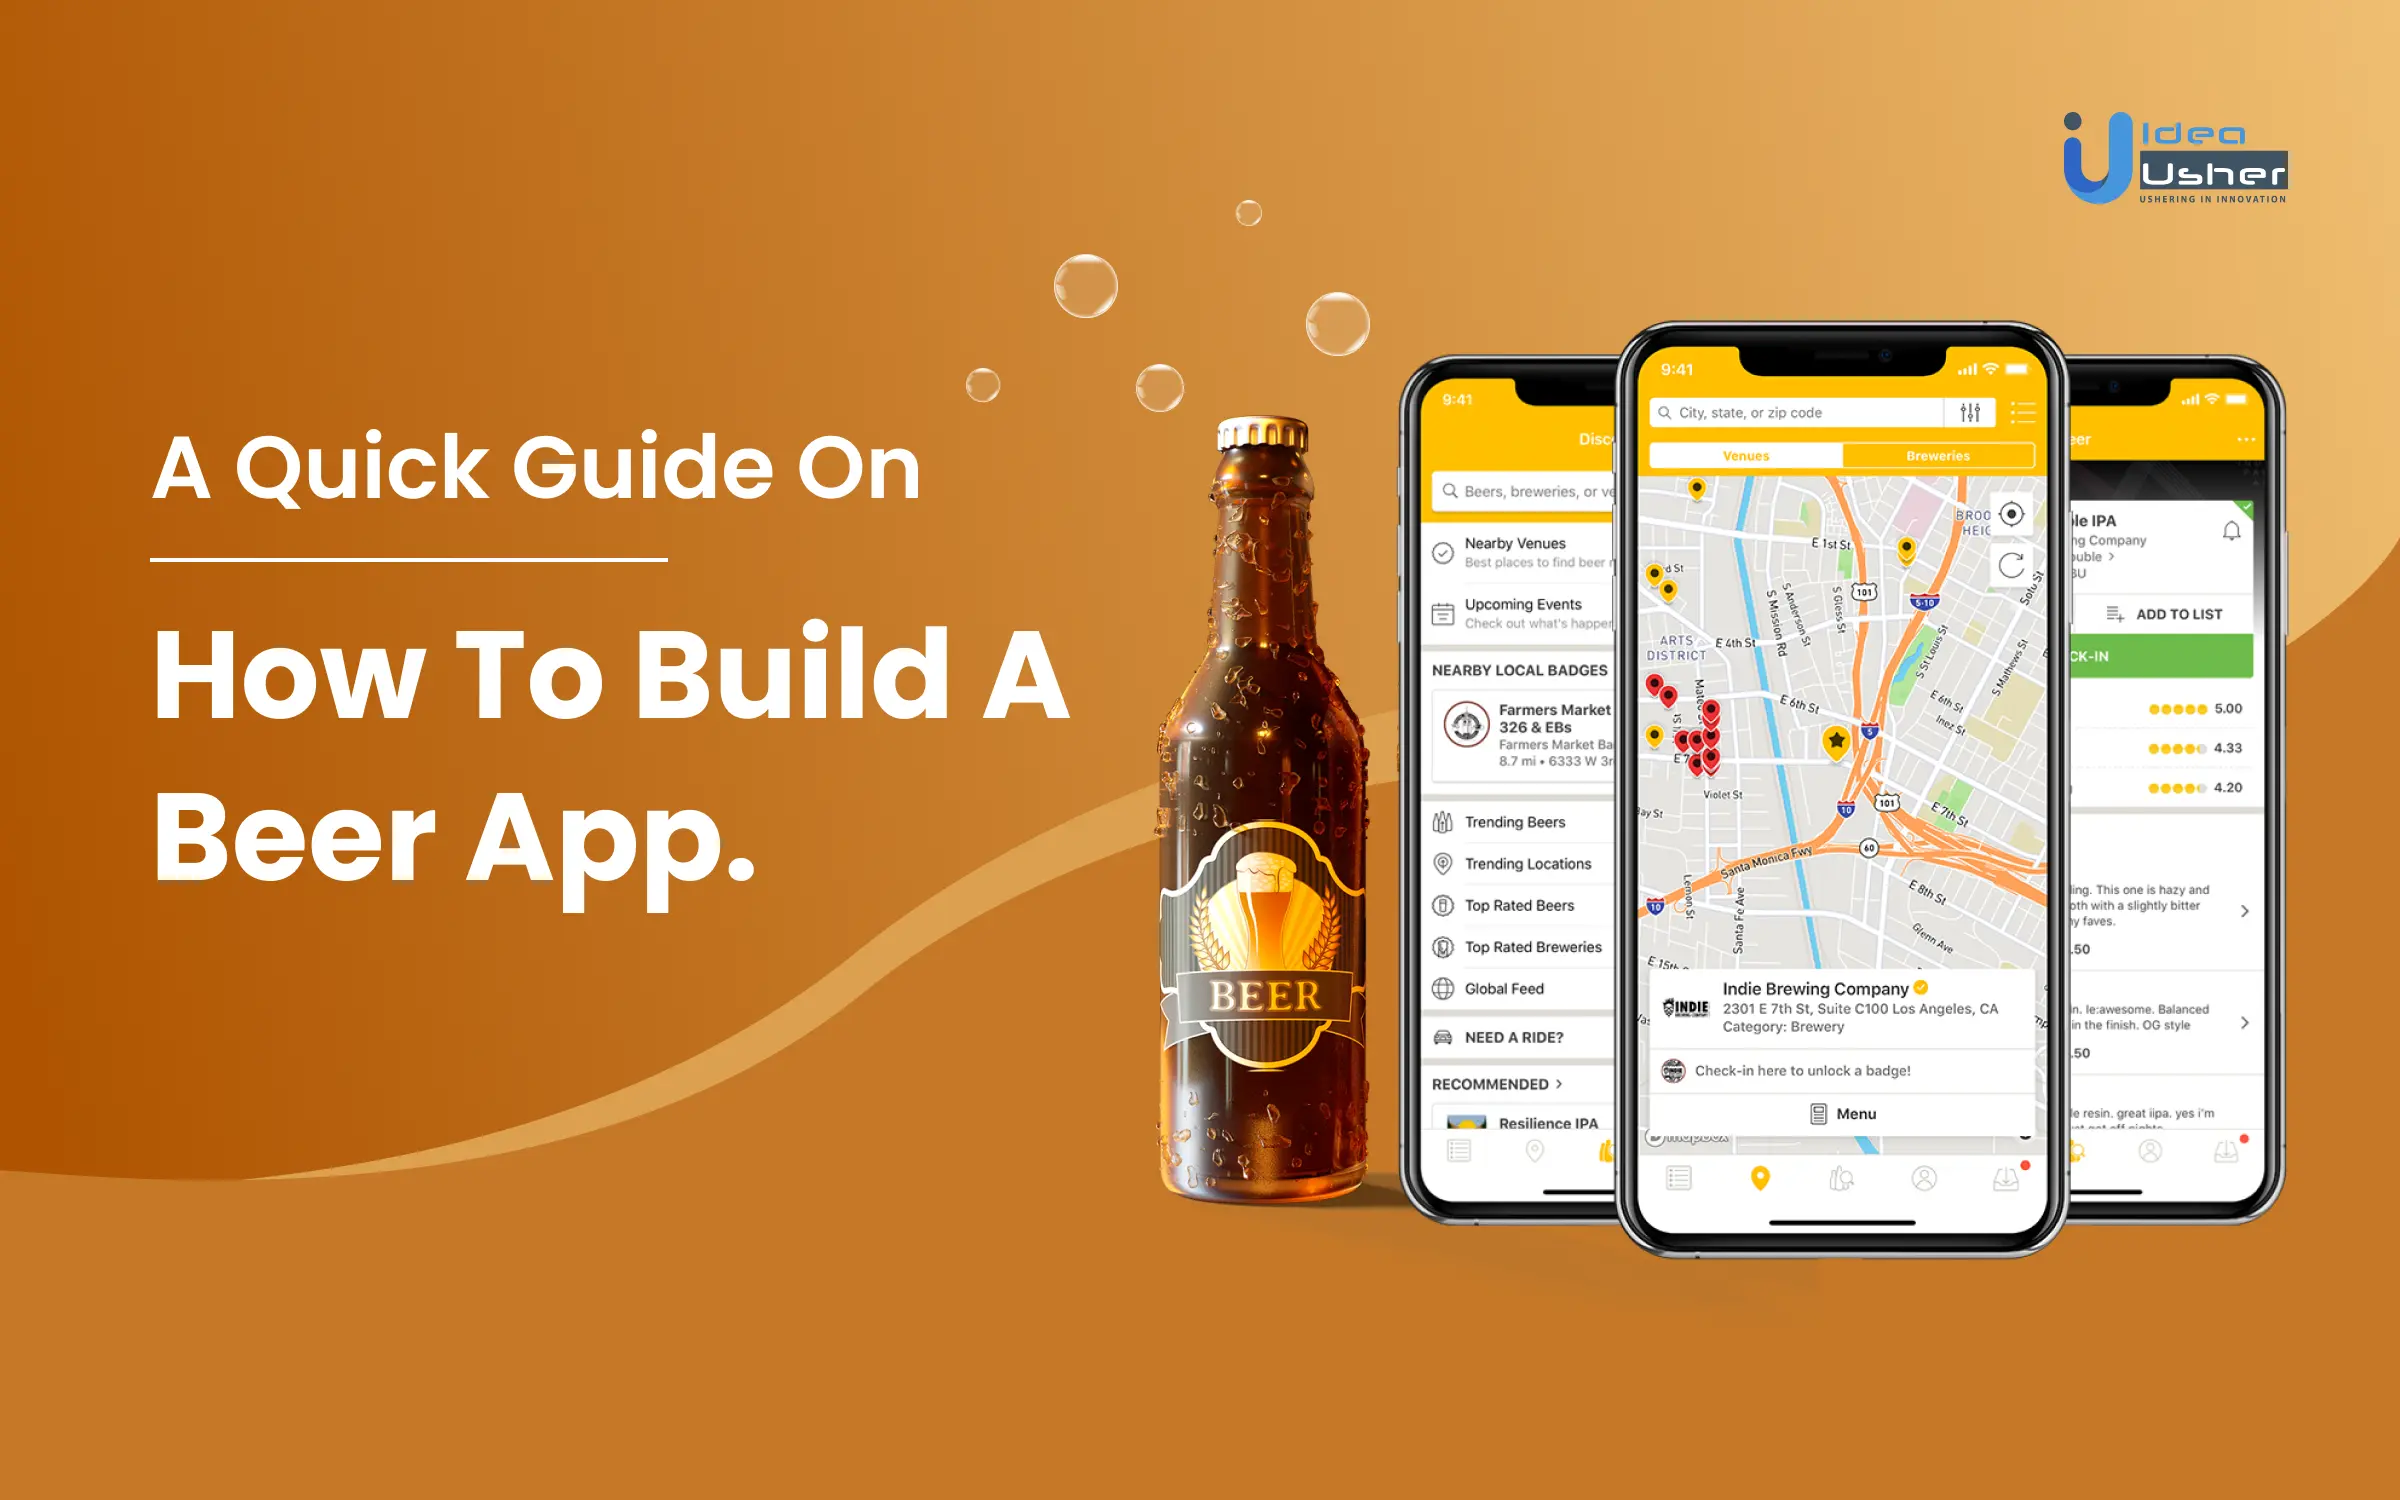 A Quick Guide On How To Build A Beer App